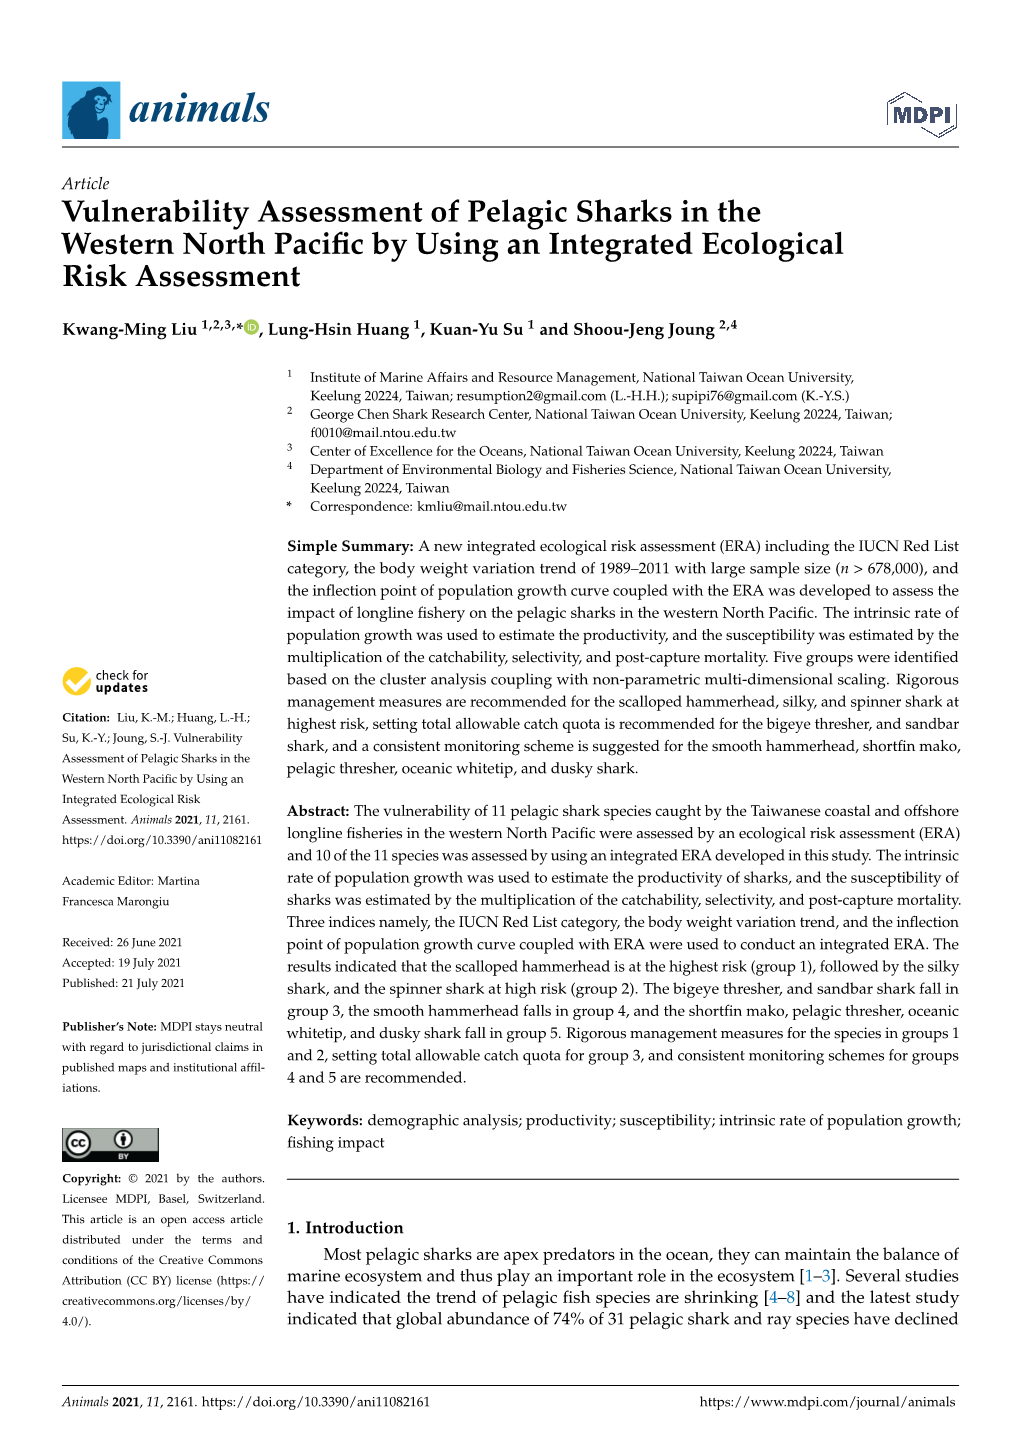 Vulnerability Assessment of Pelagic Sharks in the Western North Pacific